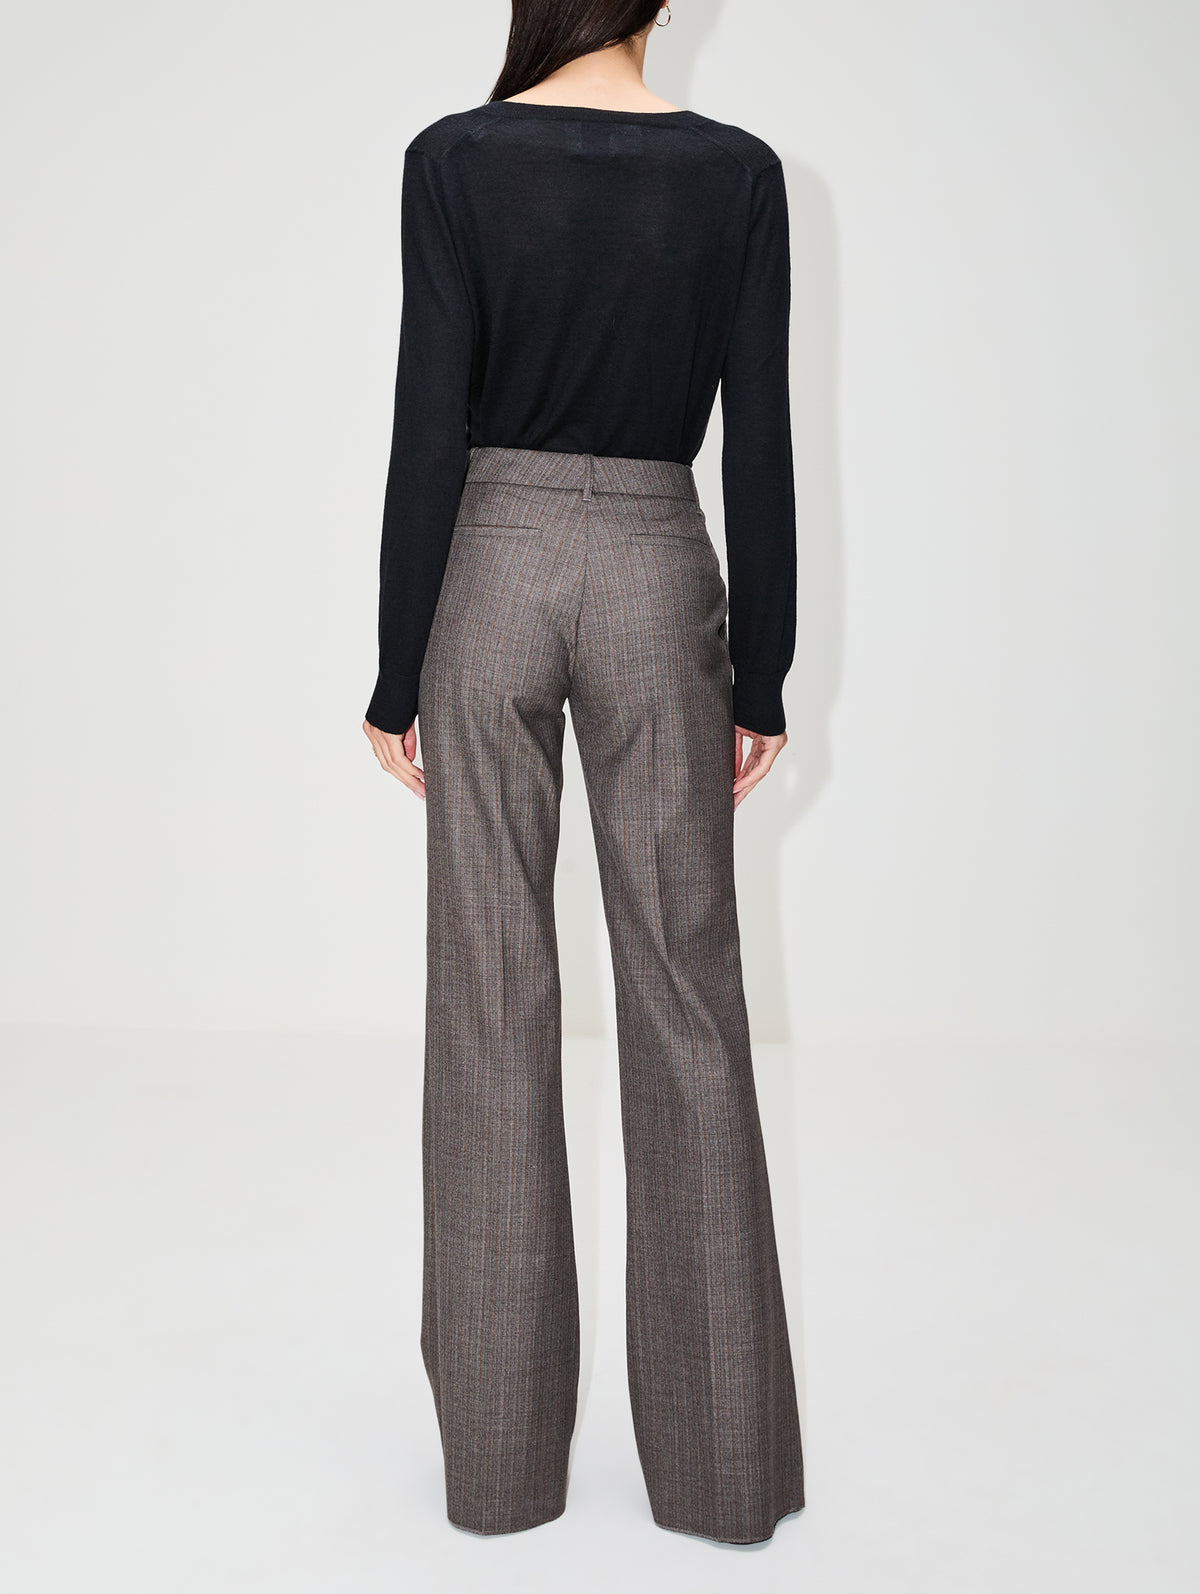 view 3 - Wool Suit Pant